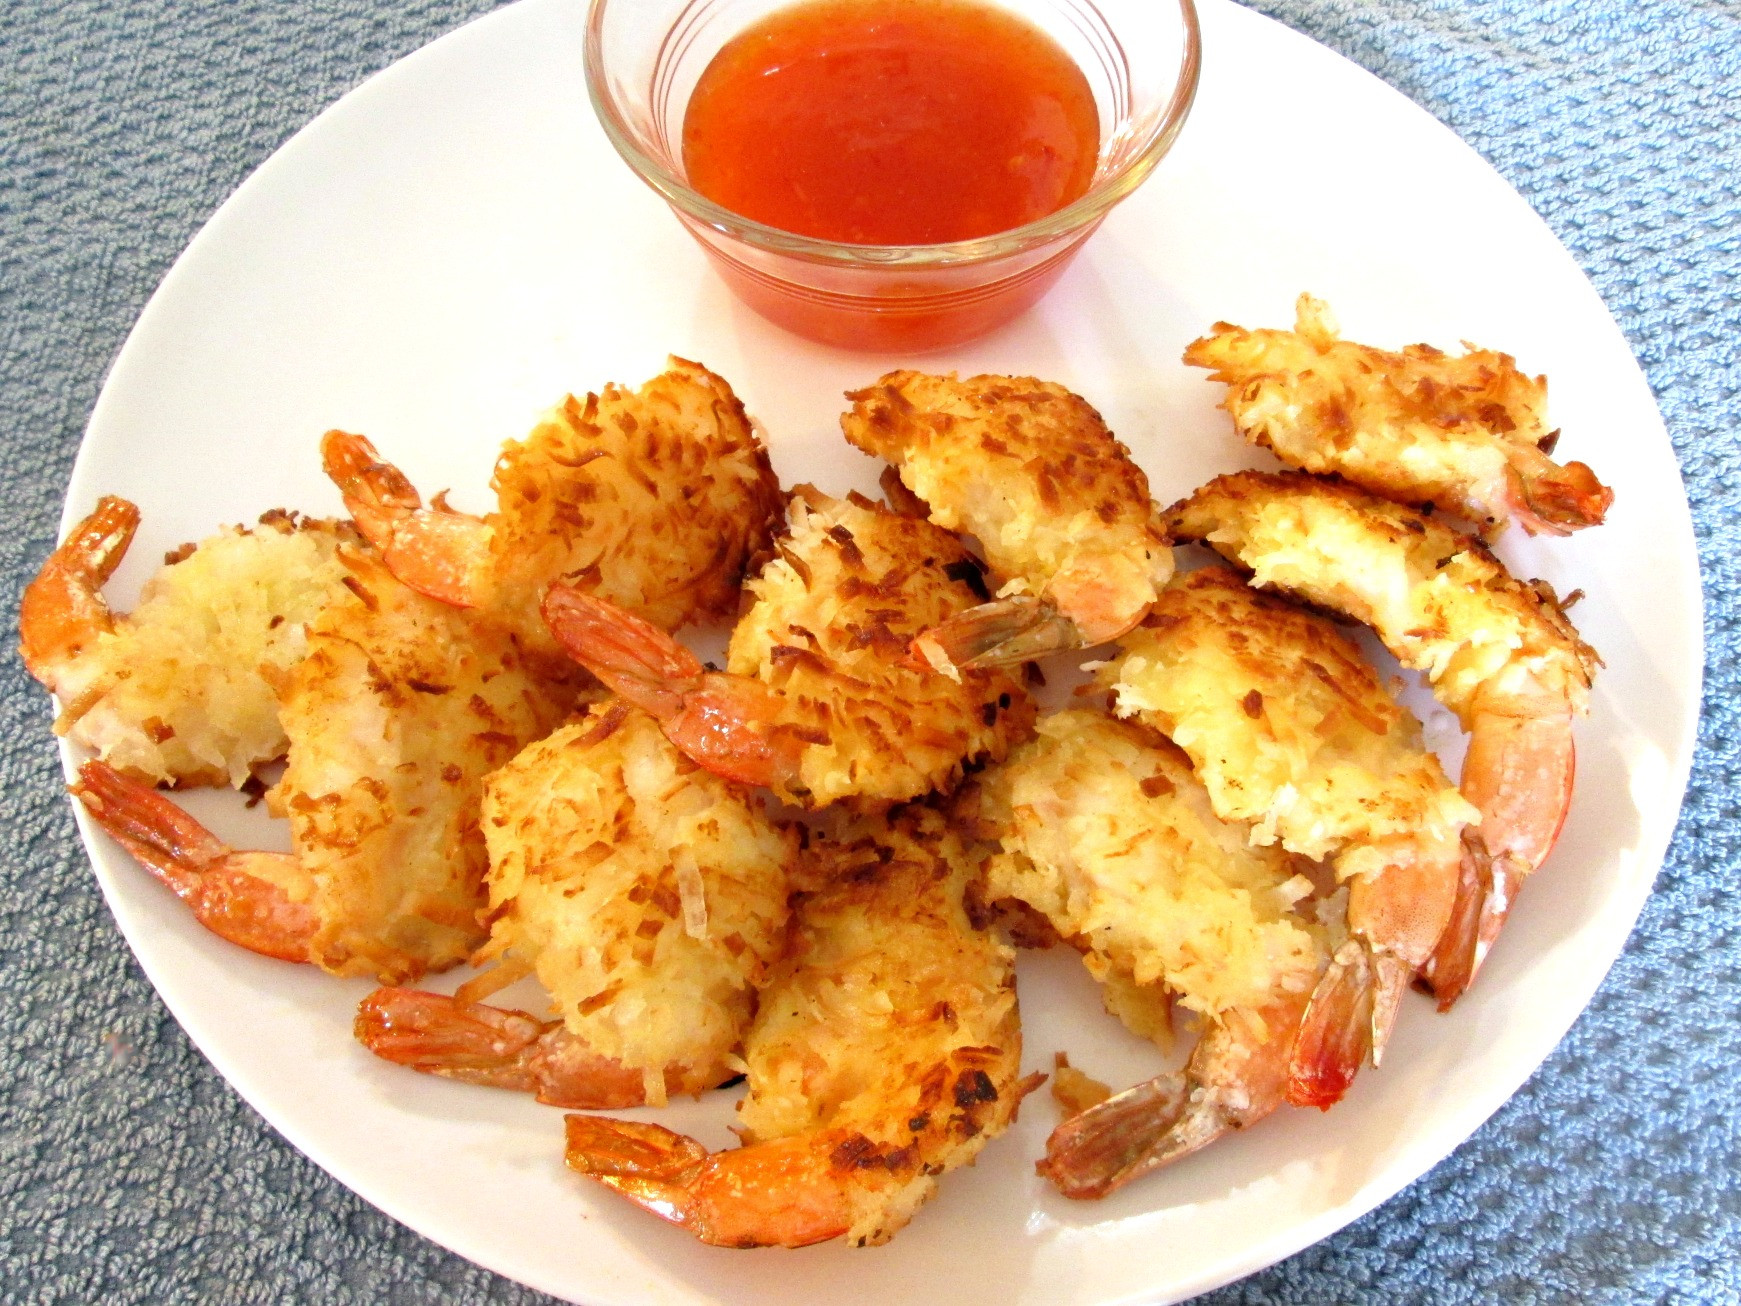 15 Of the Best Ideas for Outback Coconut Shrimp Recipes